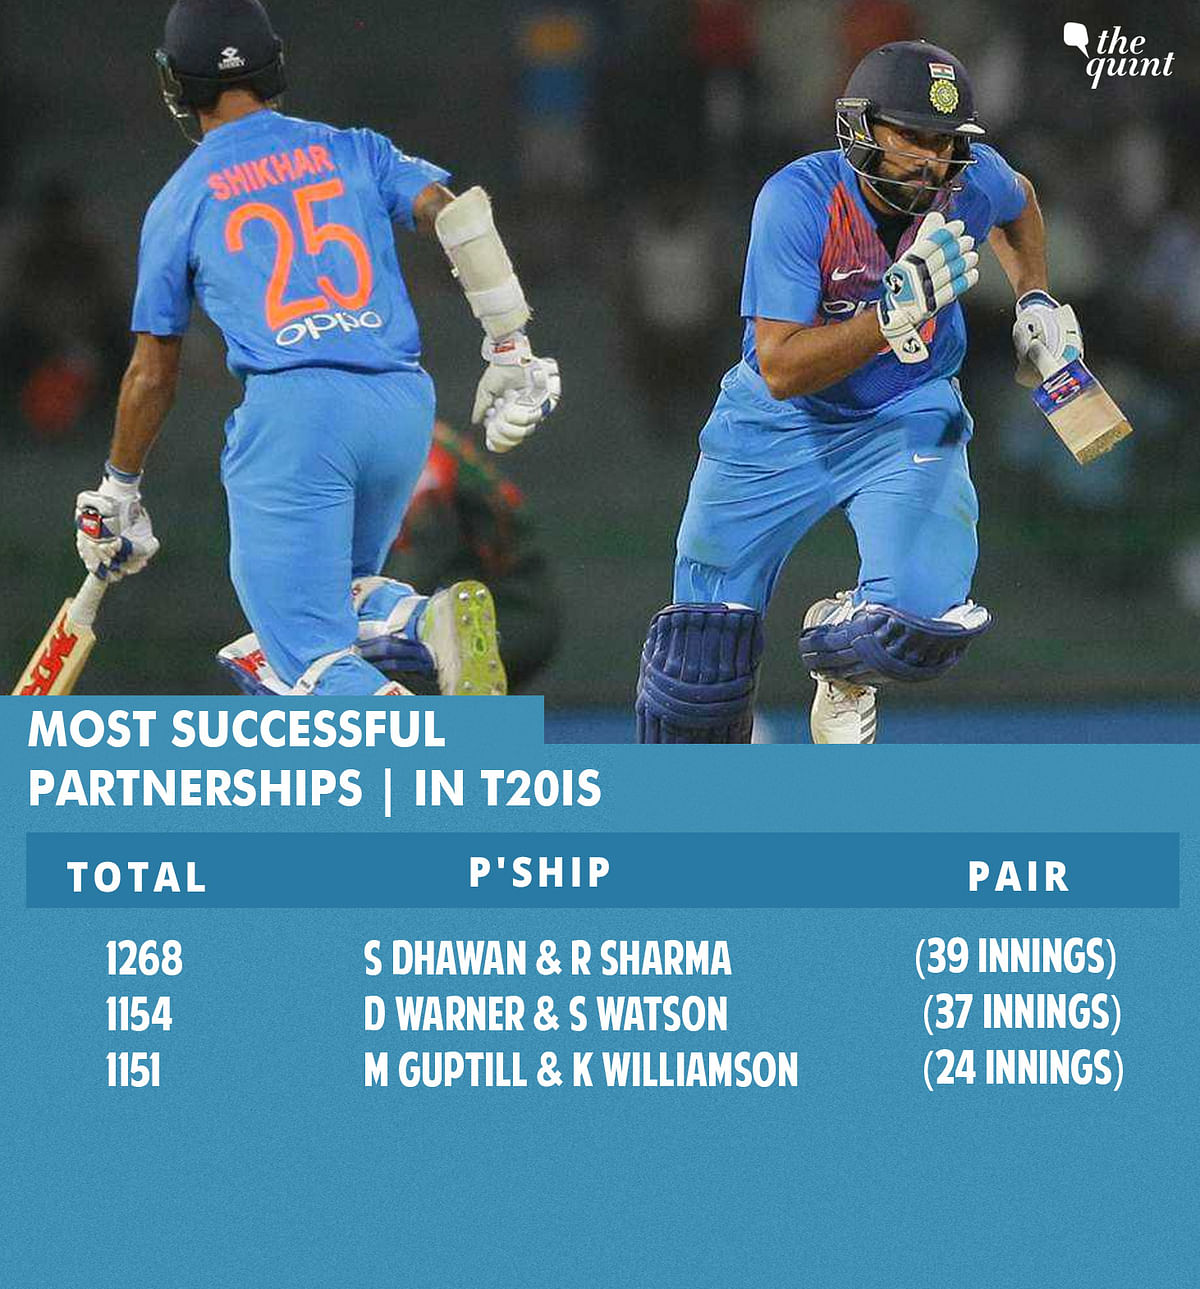 Prithvi Shaw, Virat Kohli and Rohit Sharma broke multiple records during the home games against West Indies.